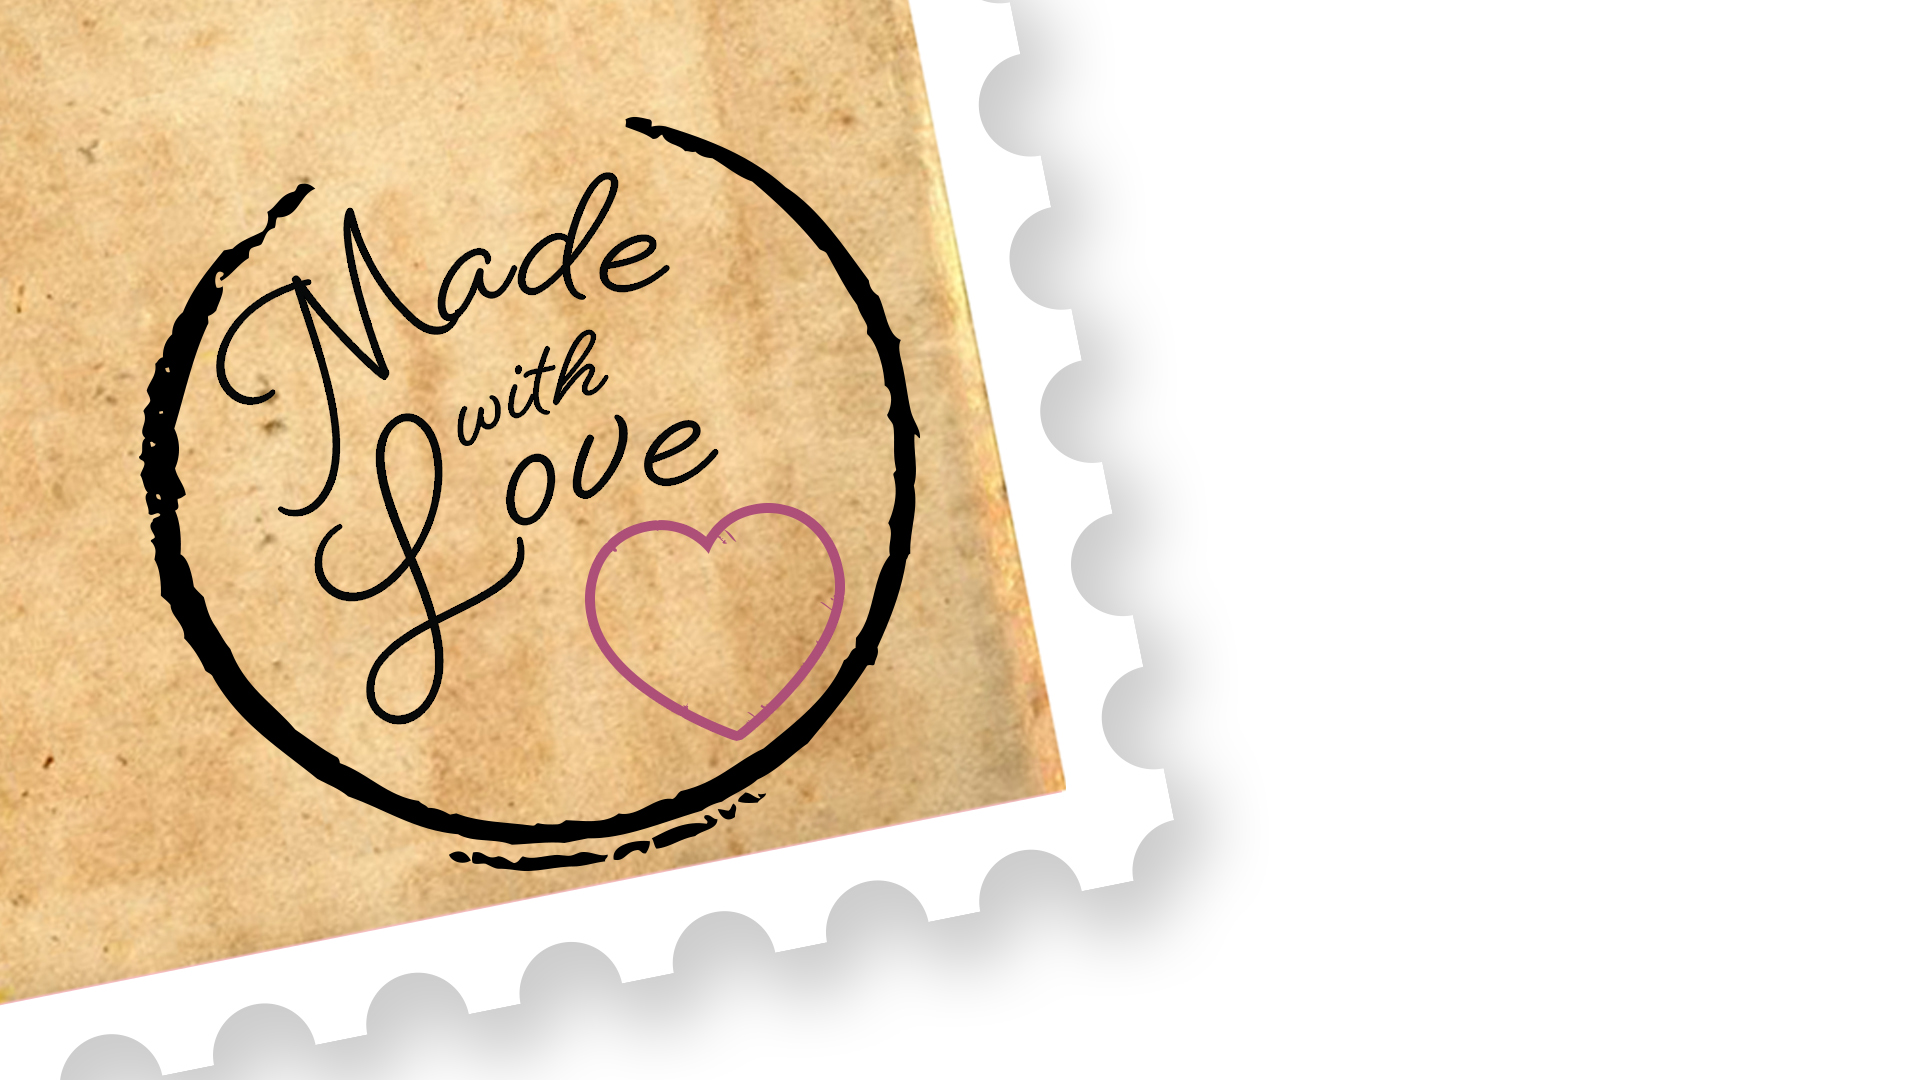 Made With Love

Thursday | 6:00 - 8:00pm
September 14 - October 26
